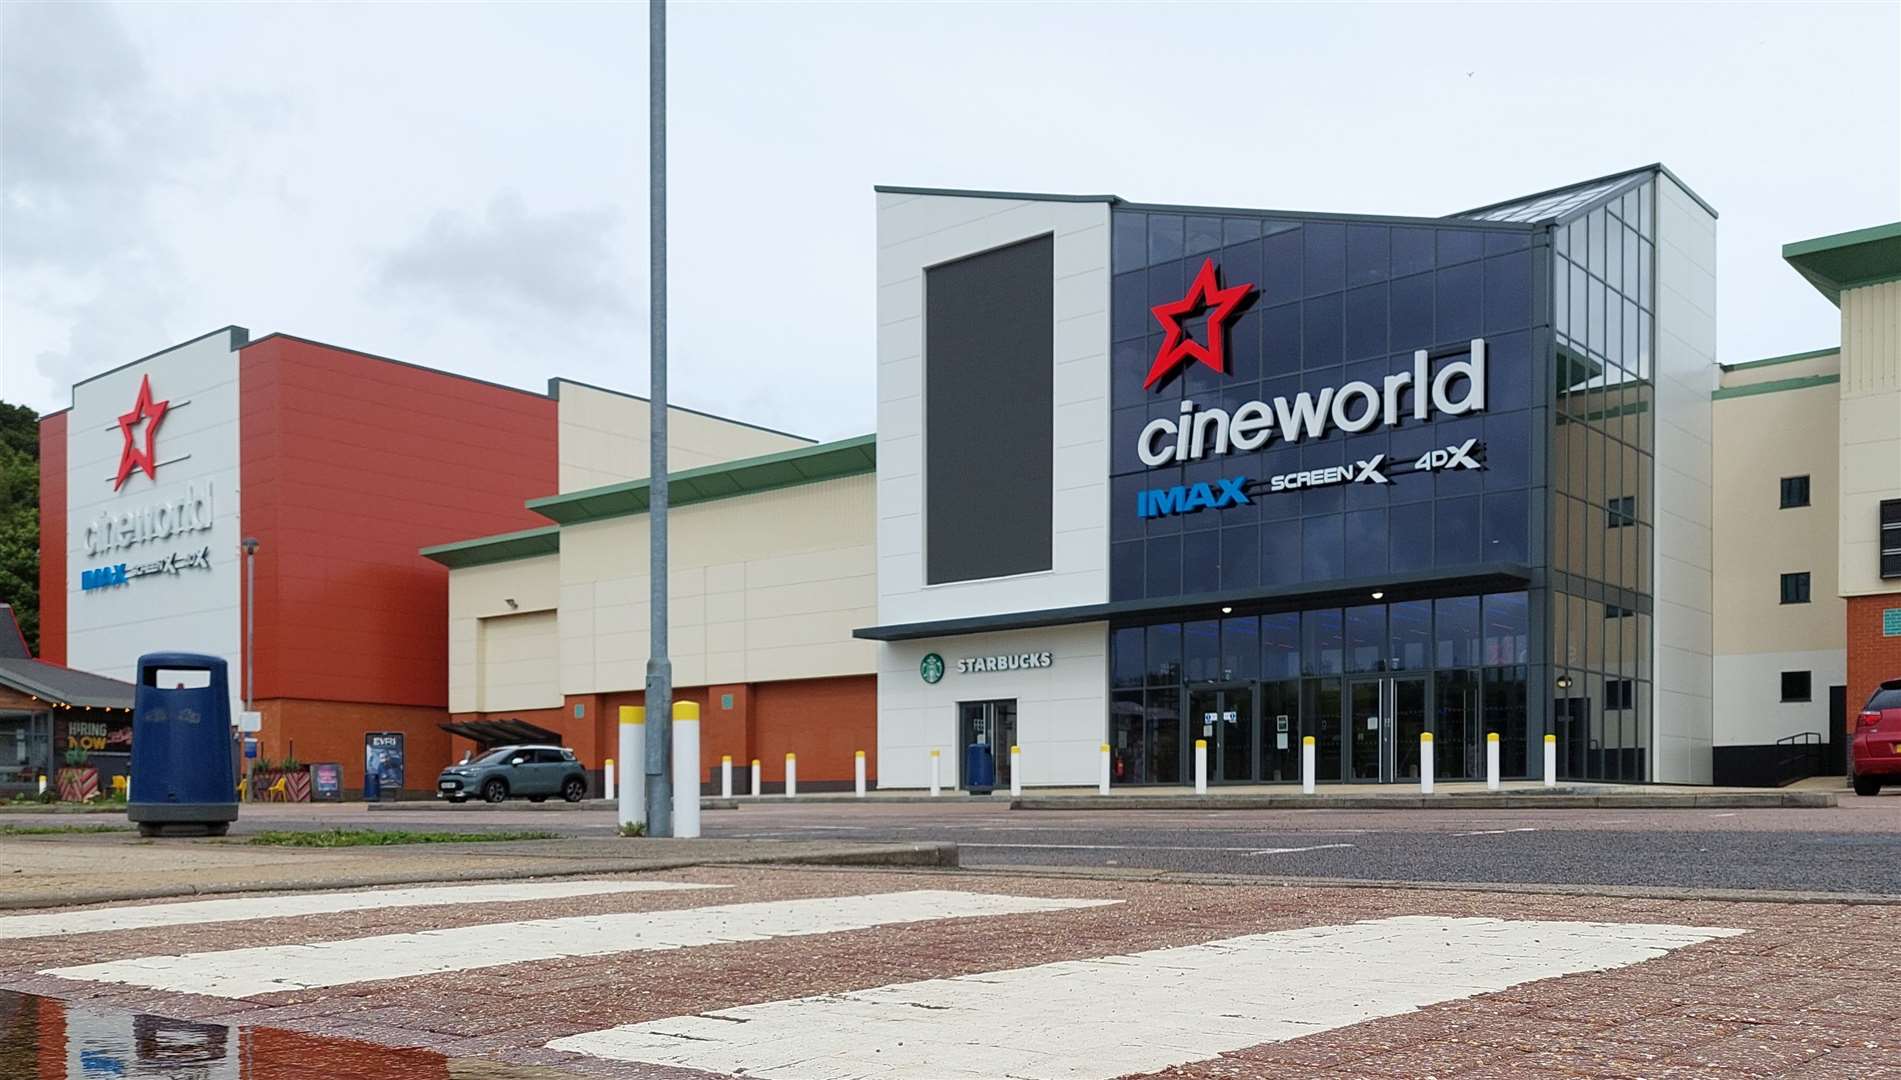 Cineworld in Ashford is one of four cinemas in Kent owned by the firm